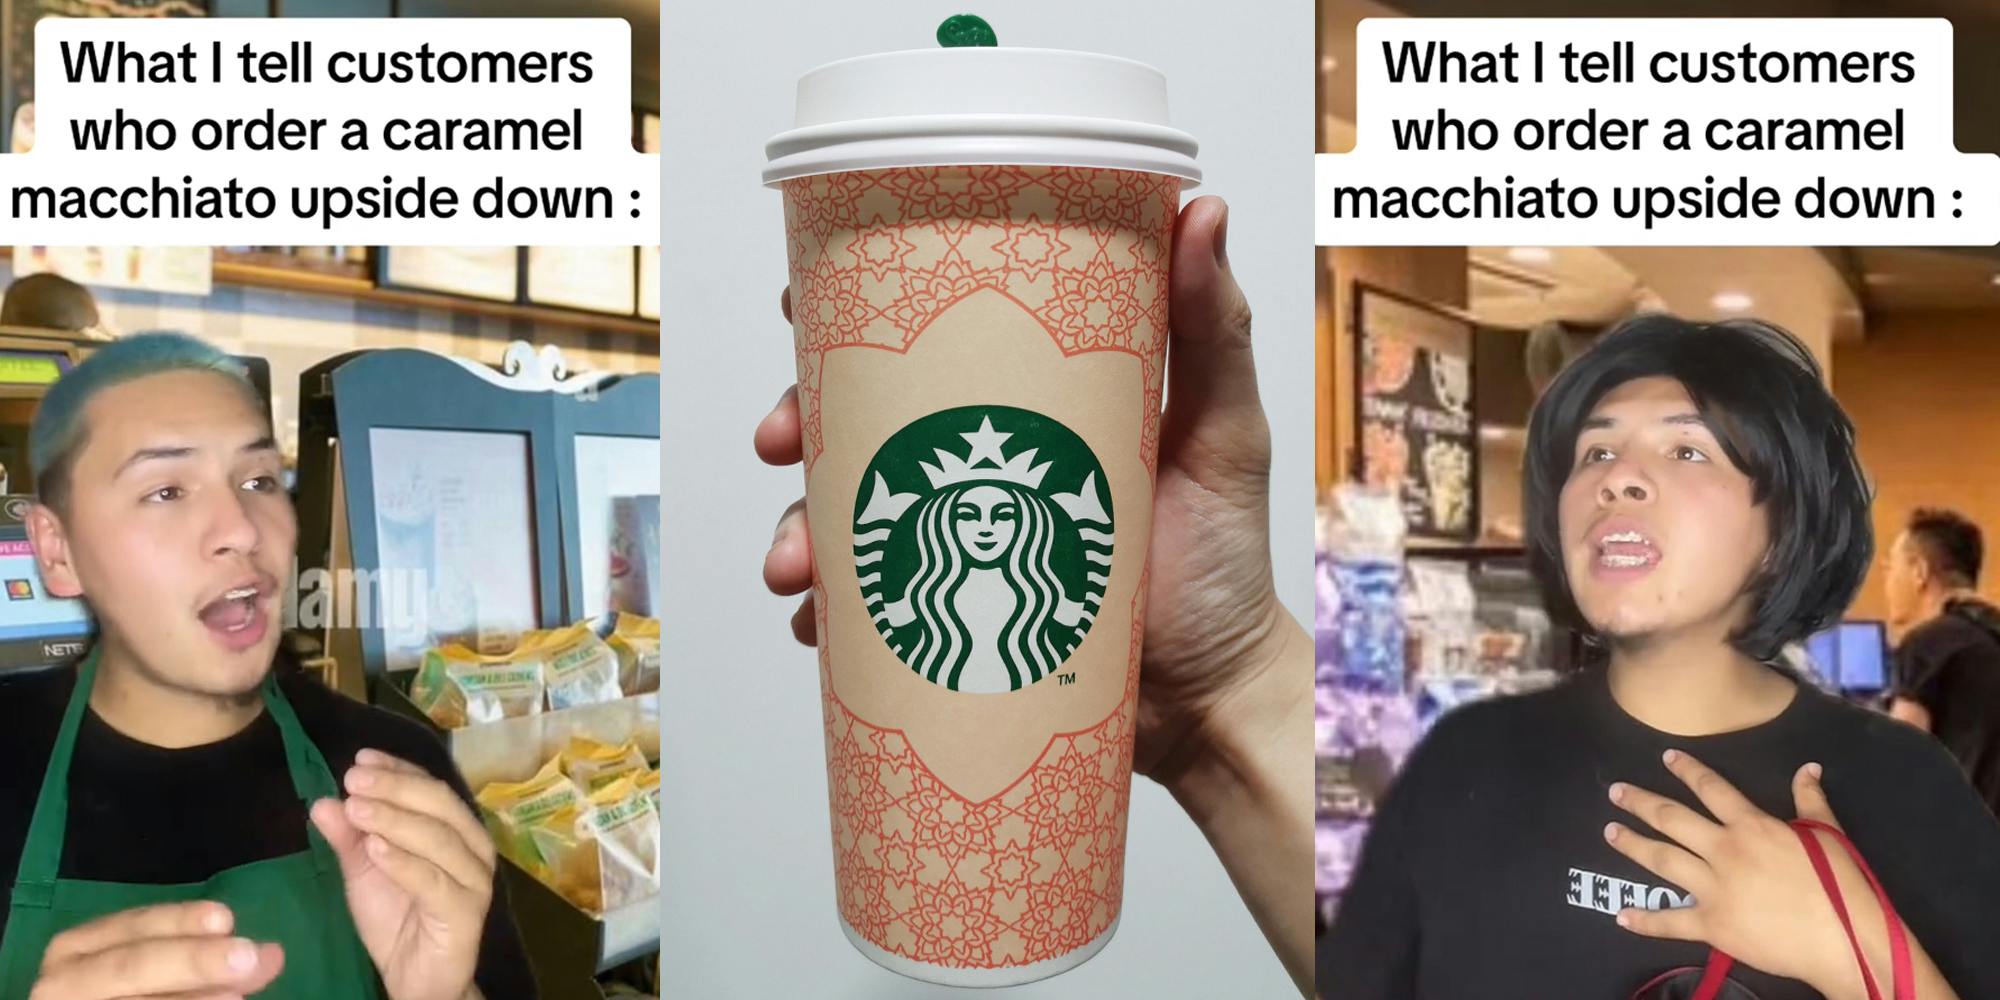 Starbucks barista greenscreen TikTok over image of coffee shop with caption "What I tell customers who order a caramel macchiato upside down:" (l) hand holding Starbucks hot drink in front of white (c) Starbucks barista greenscreen TikTok over image of coffee shop with caption "What I tell customers who order a caramel macchiato upside down:" (r)